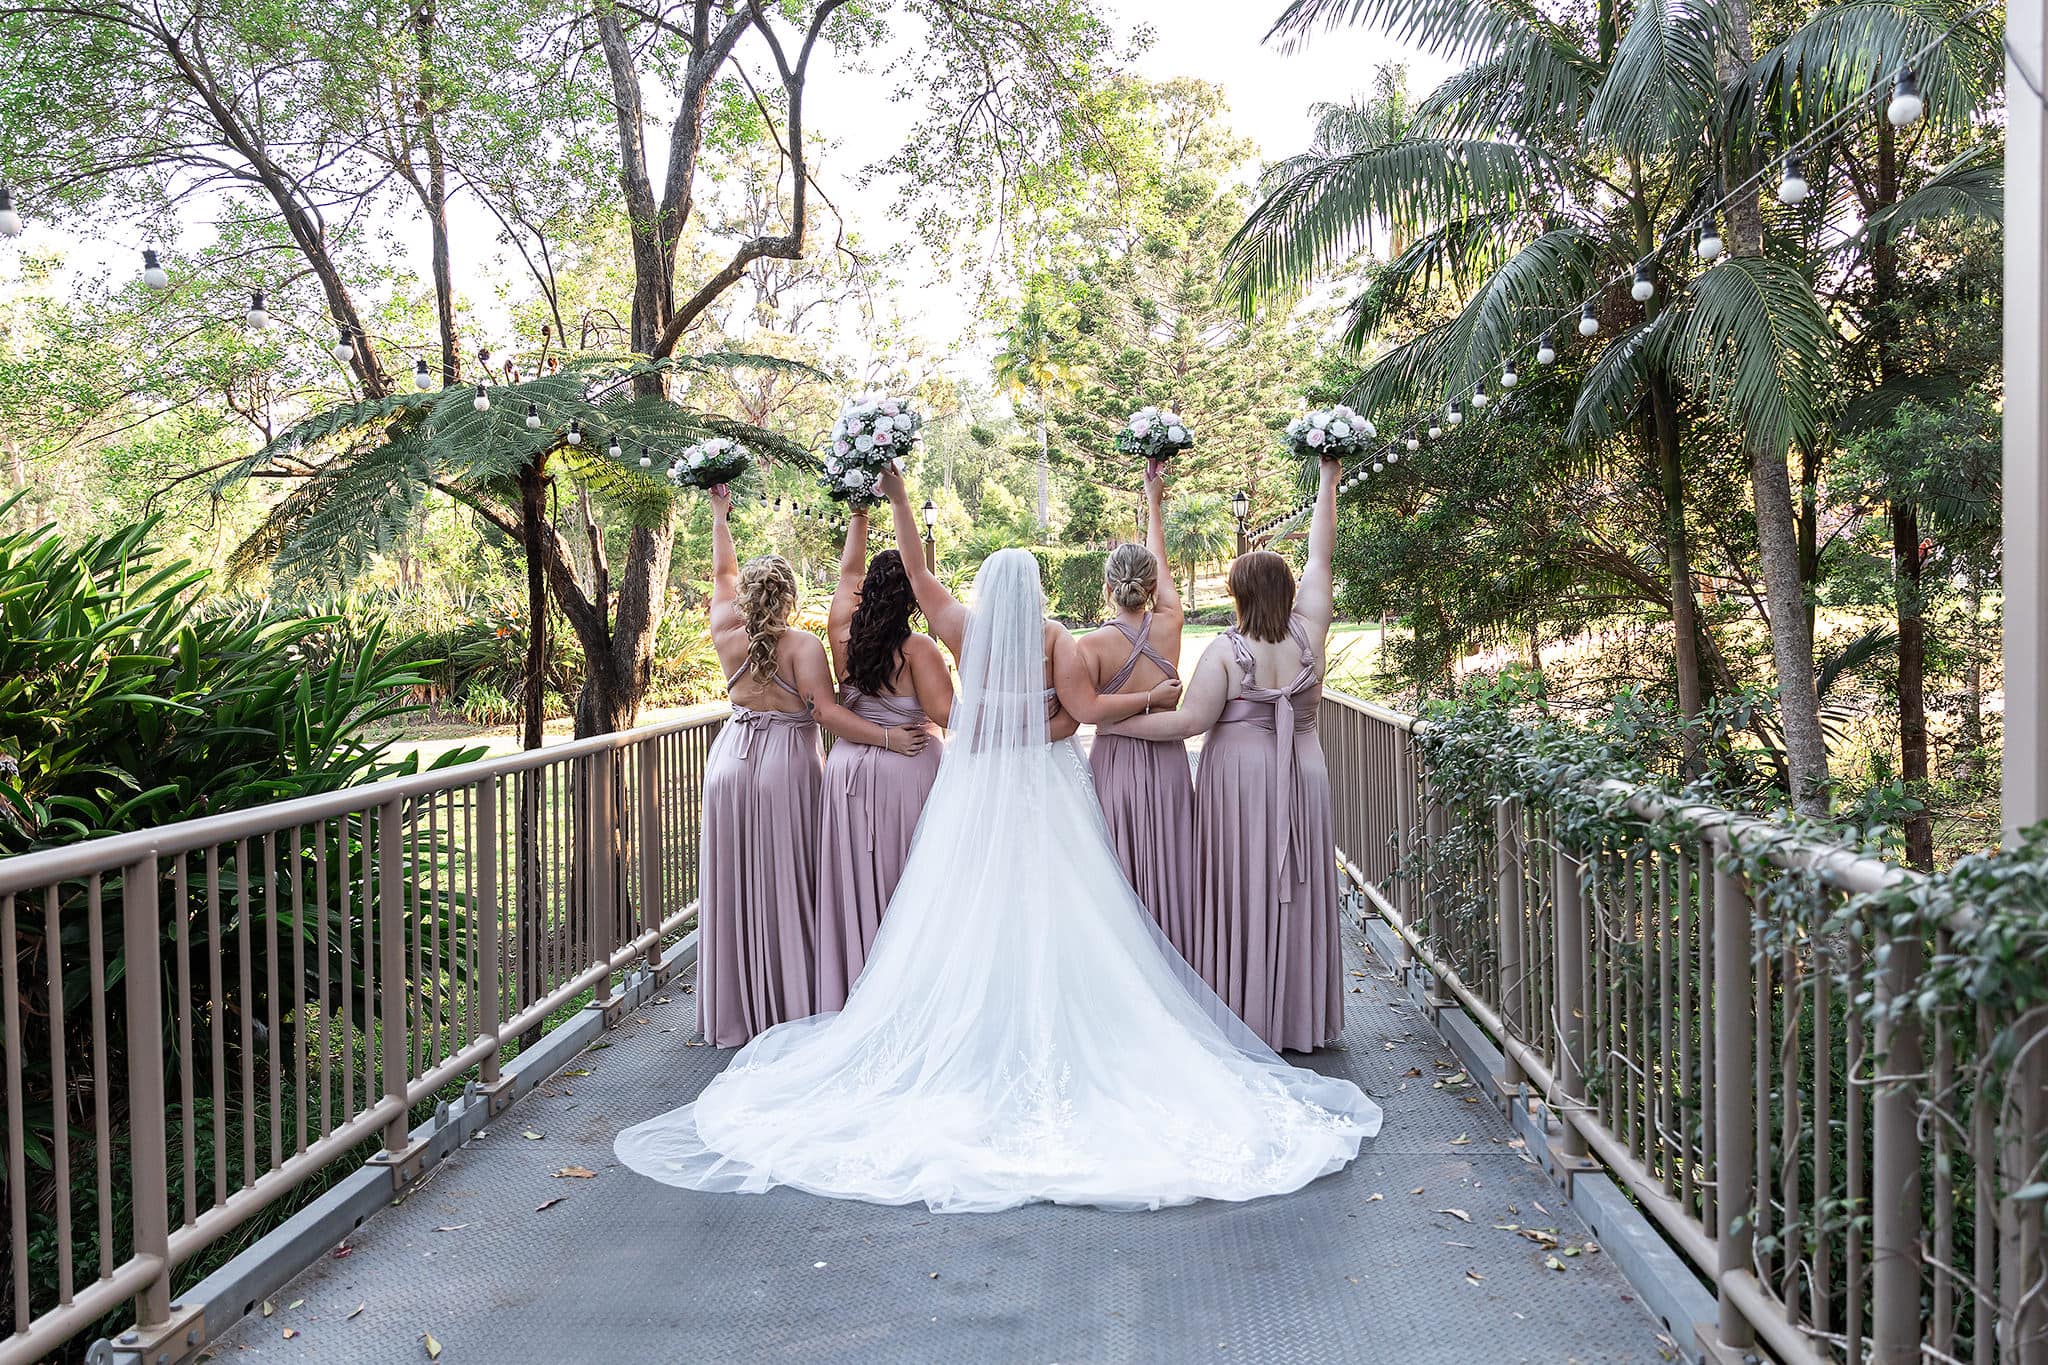 Bridal party at Coolibah Downs Private Estate, Gold Coast wedding venue.